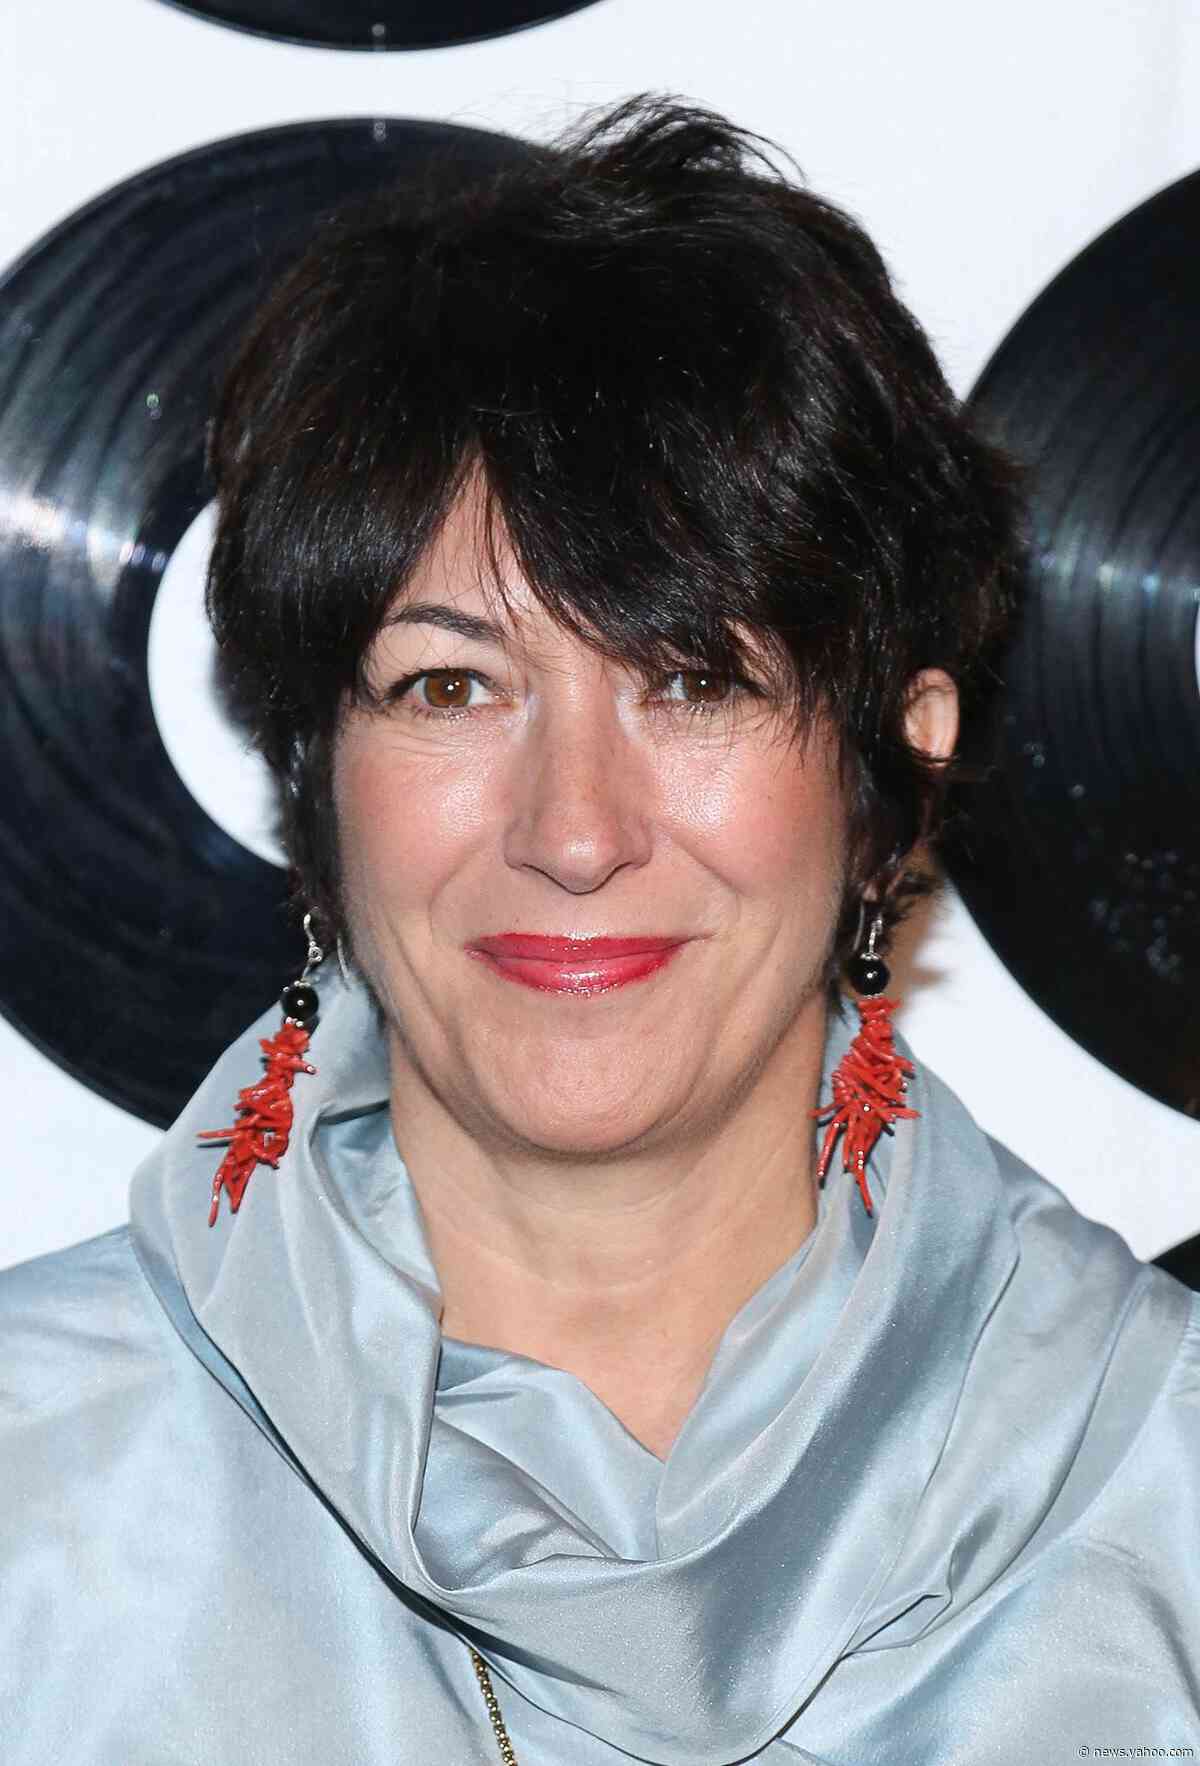 Ghislaine Maxwell argues for $5 million bail, saying she&#39;s &#39;not Jeffrey Epstein&#39;